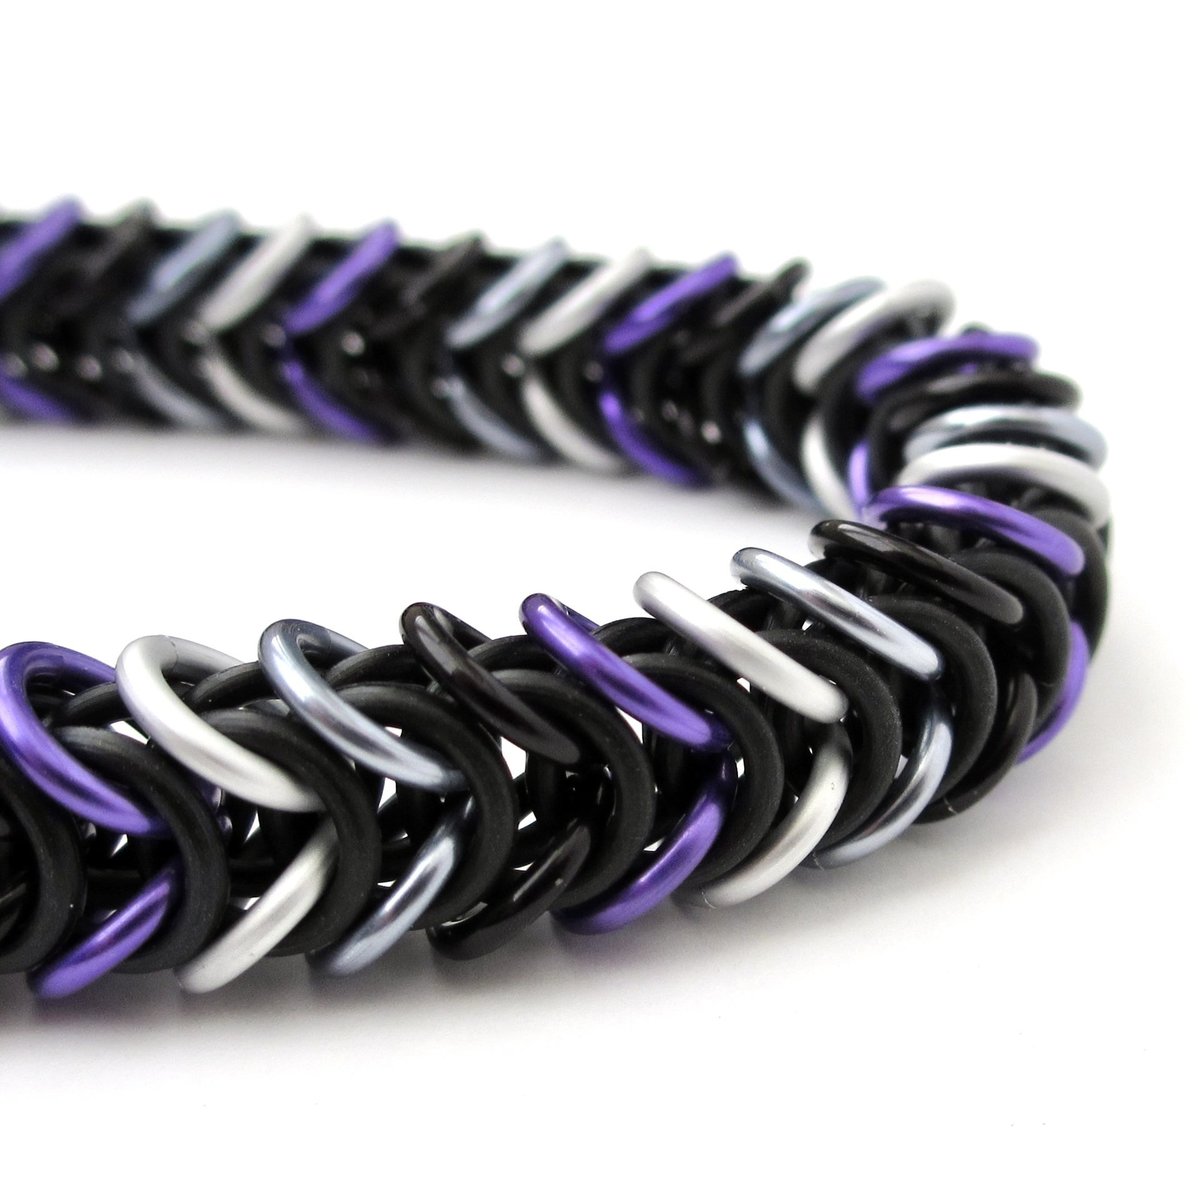 Asexual pride bracelet, chainmail stretchy bracelet, ace pride jewelry, black gray white purple